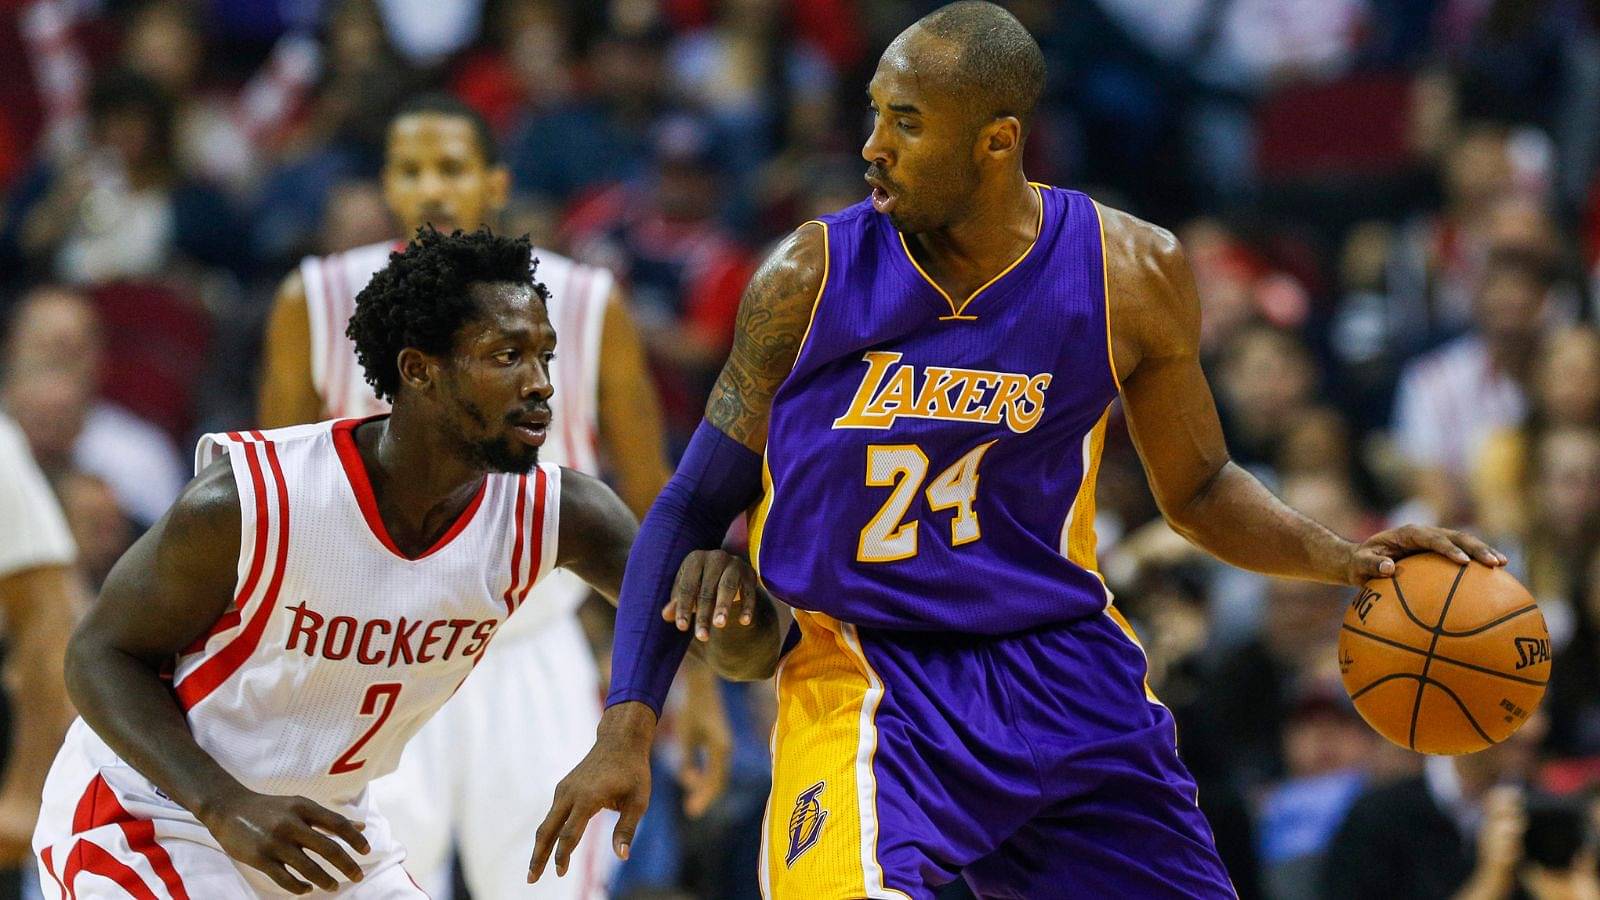 “Kobe Bryant likes you a lot! He thinks you’re a dog”: Patrick Beverley felt he ‘finally made it’ after hearing this from The Mamba